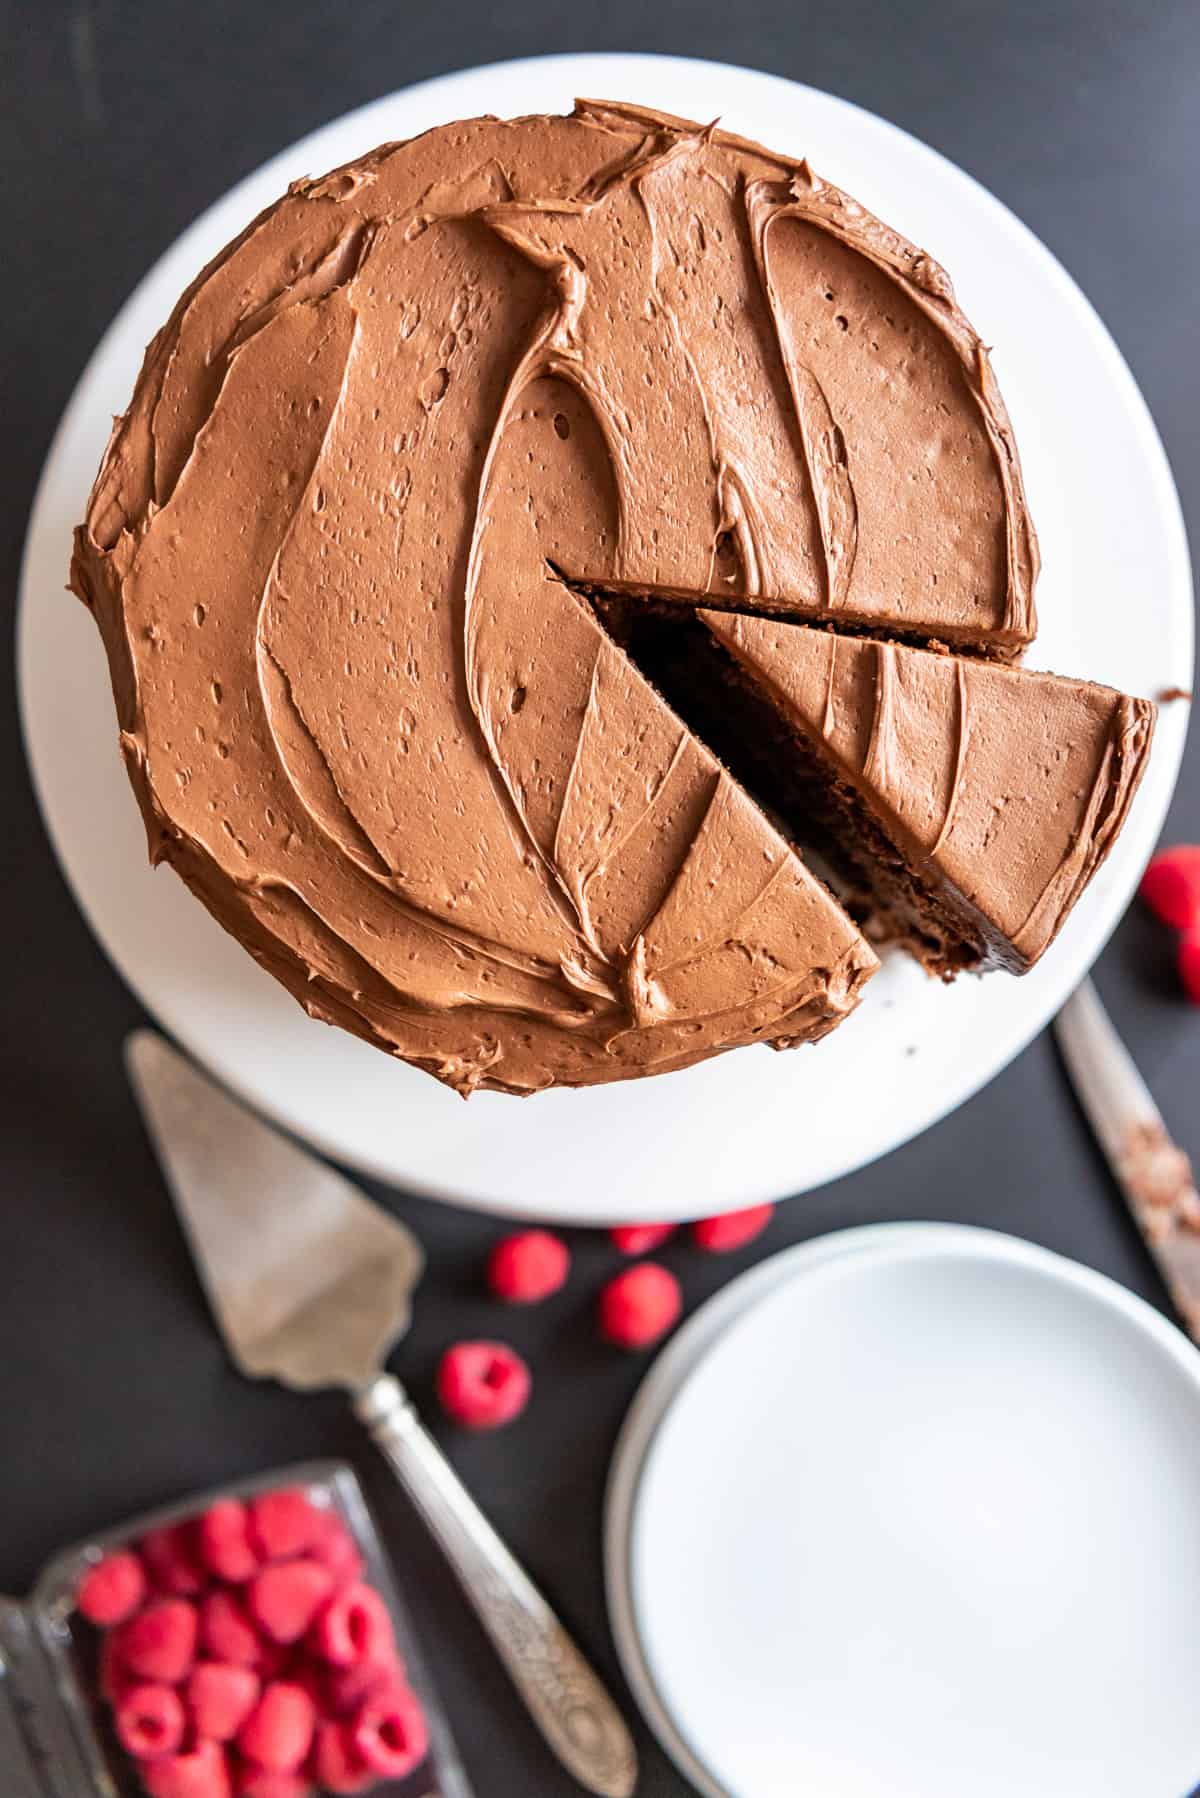 A chocolate cake with a slice cut and slightly moved out of place.